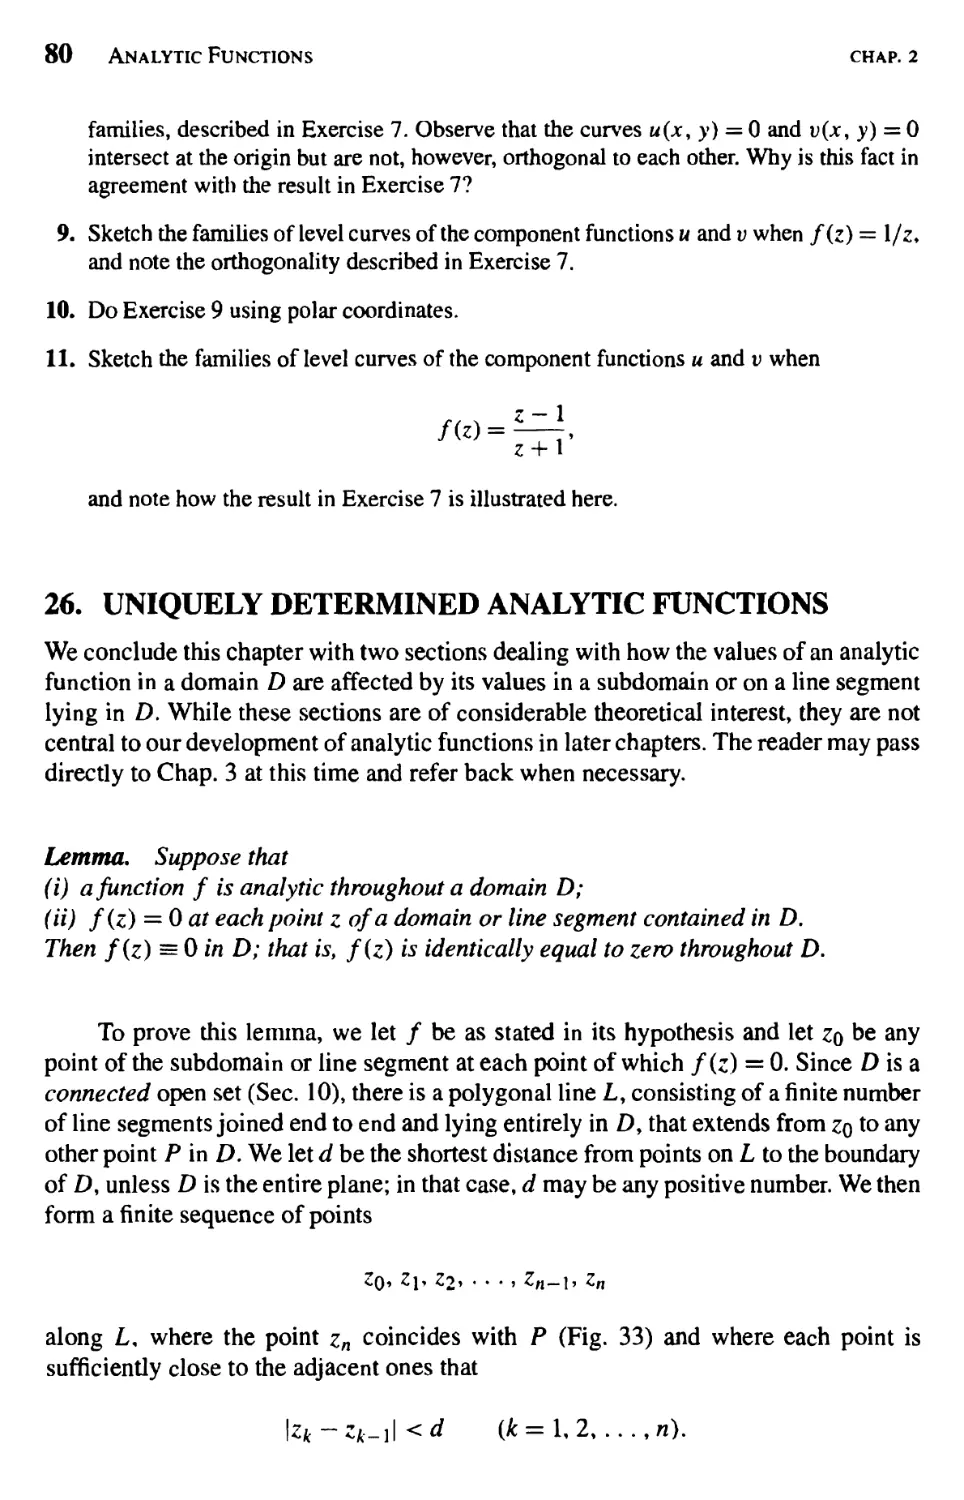 Uniquely Determined Analytic Functions